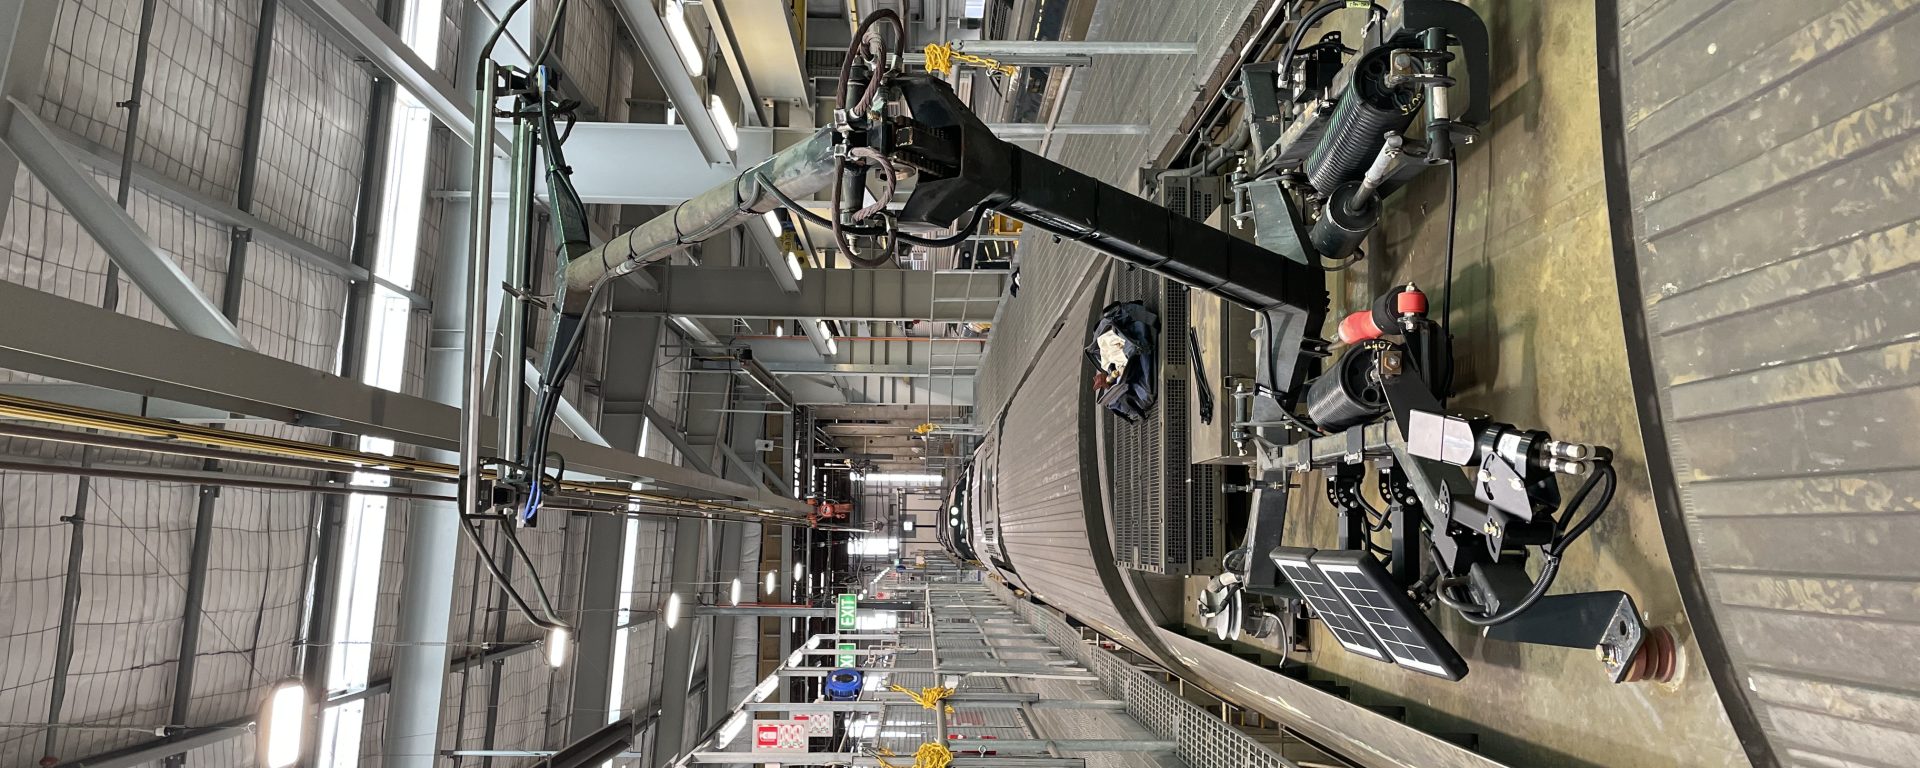 Image of new pantograph collision detection system being trialled in Wellington, New Zealand